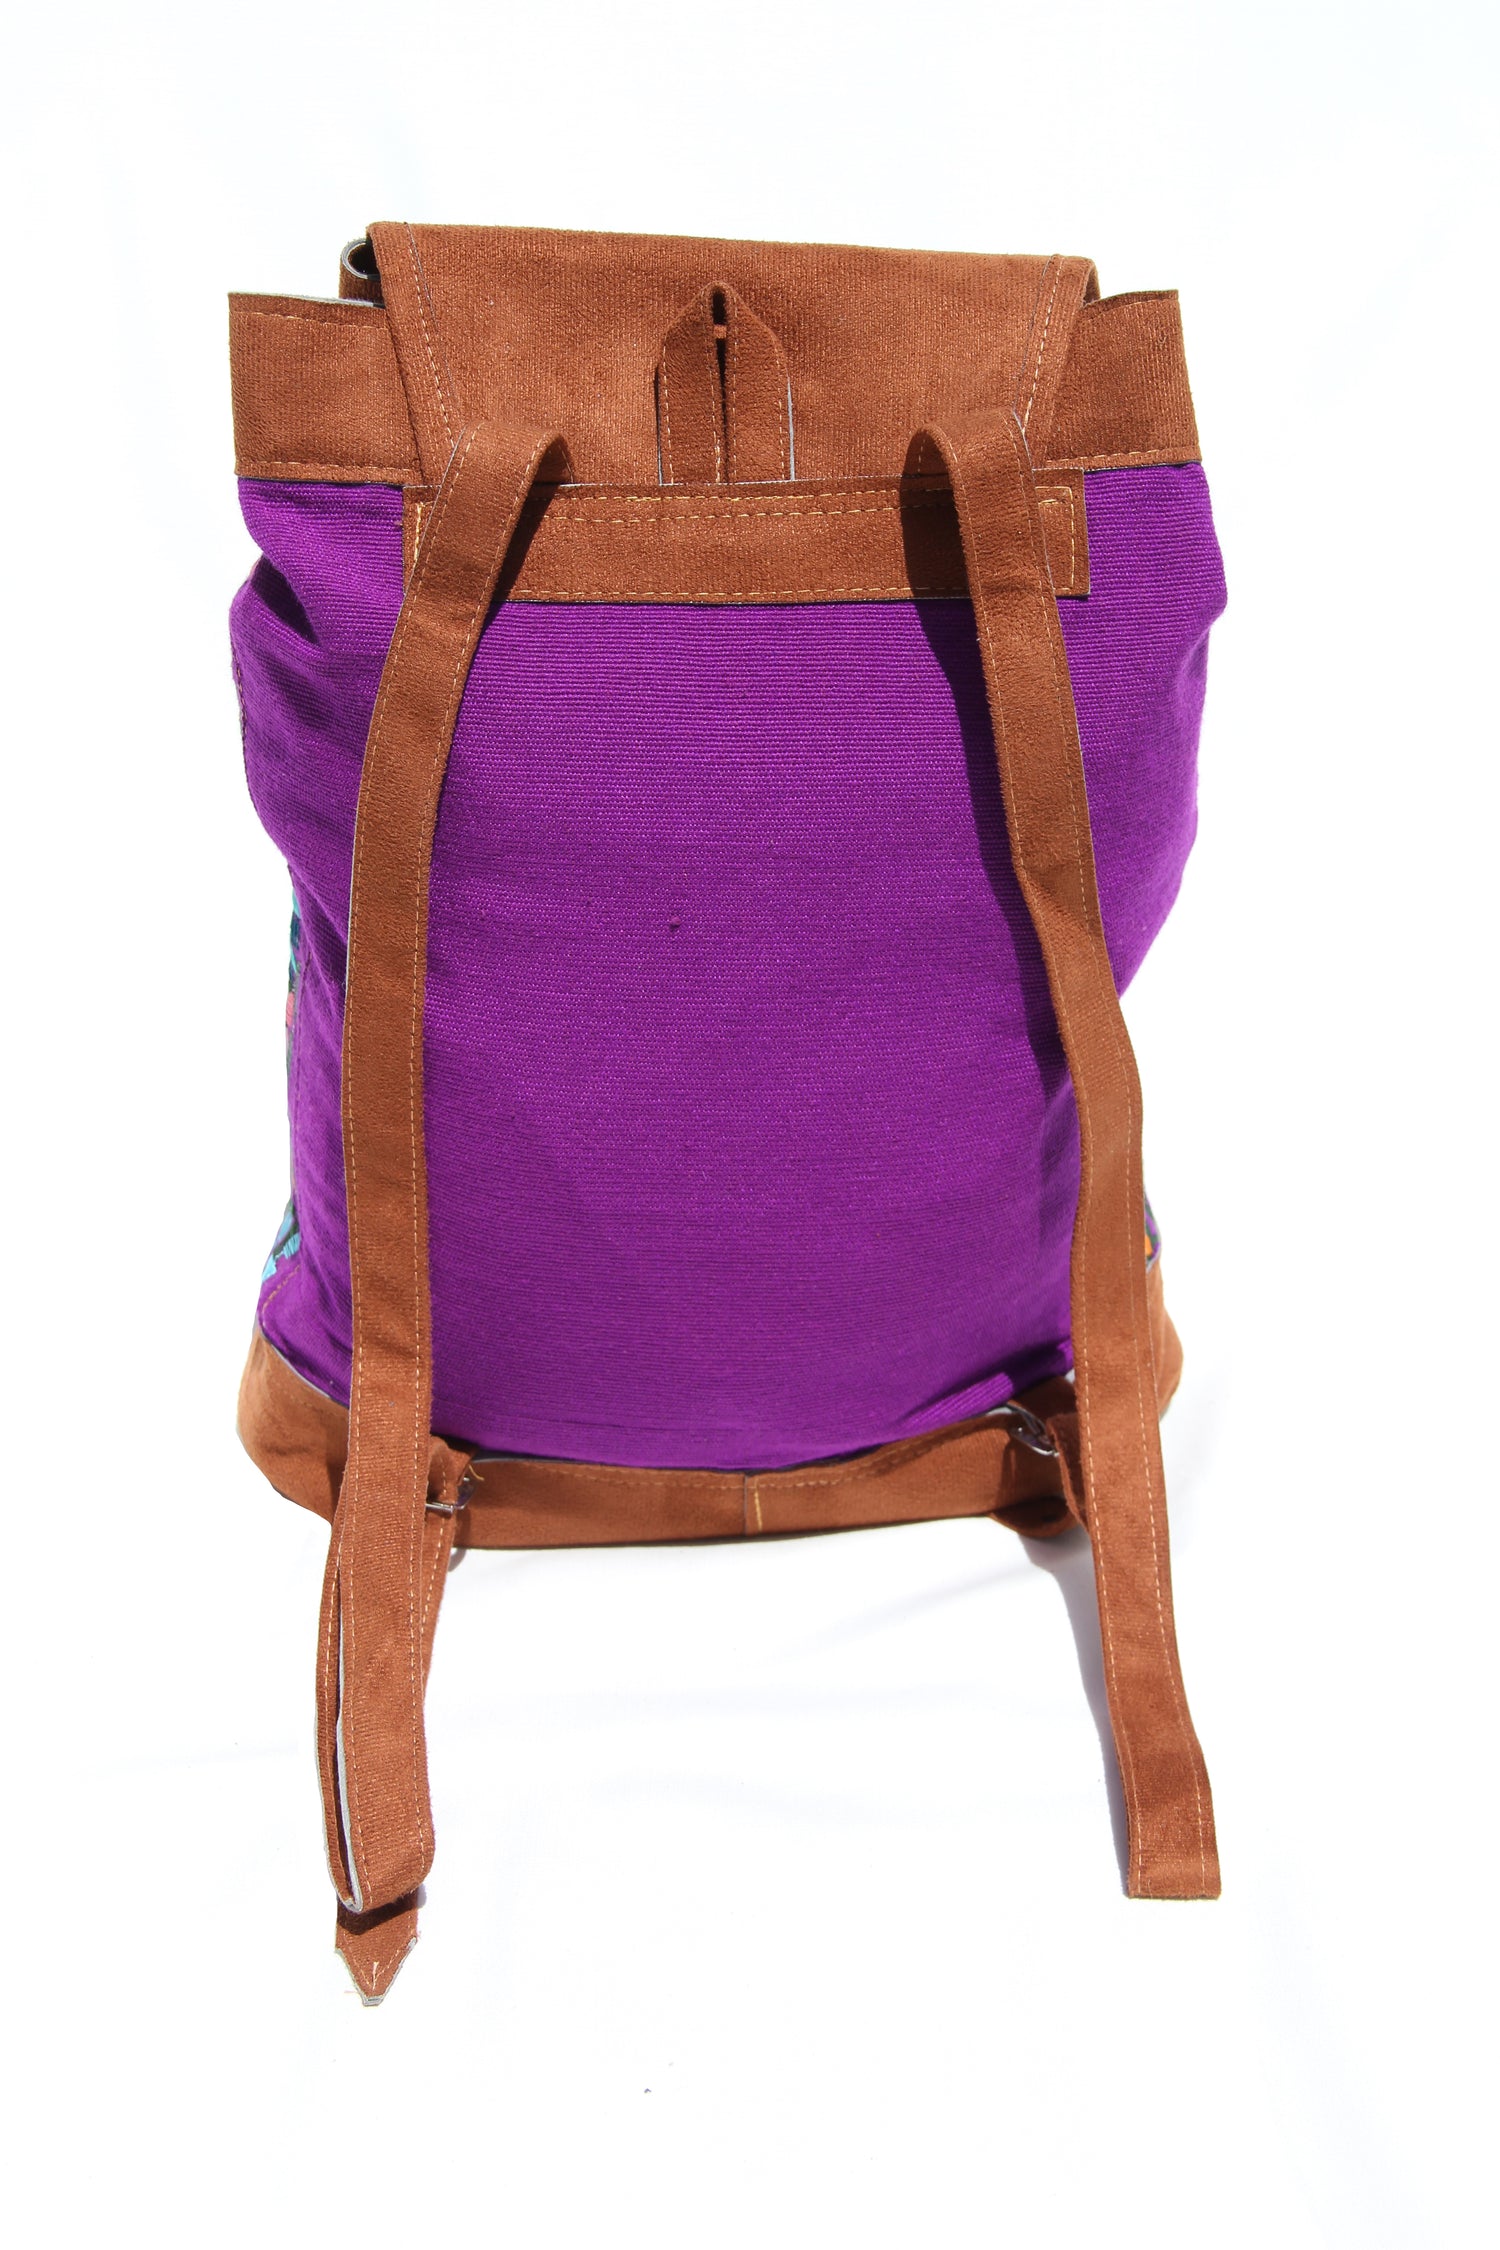 This is the backside of the backpack. It's placed on a solid white background. The back side of the bag is solid purple and it includes two brown faux suede shoulder straps. They can be adjusted to whatever length you'd like.